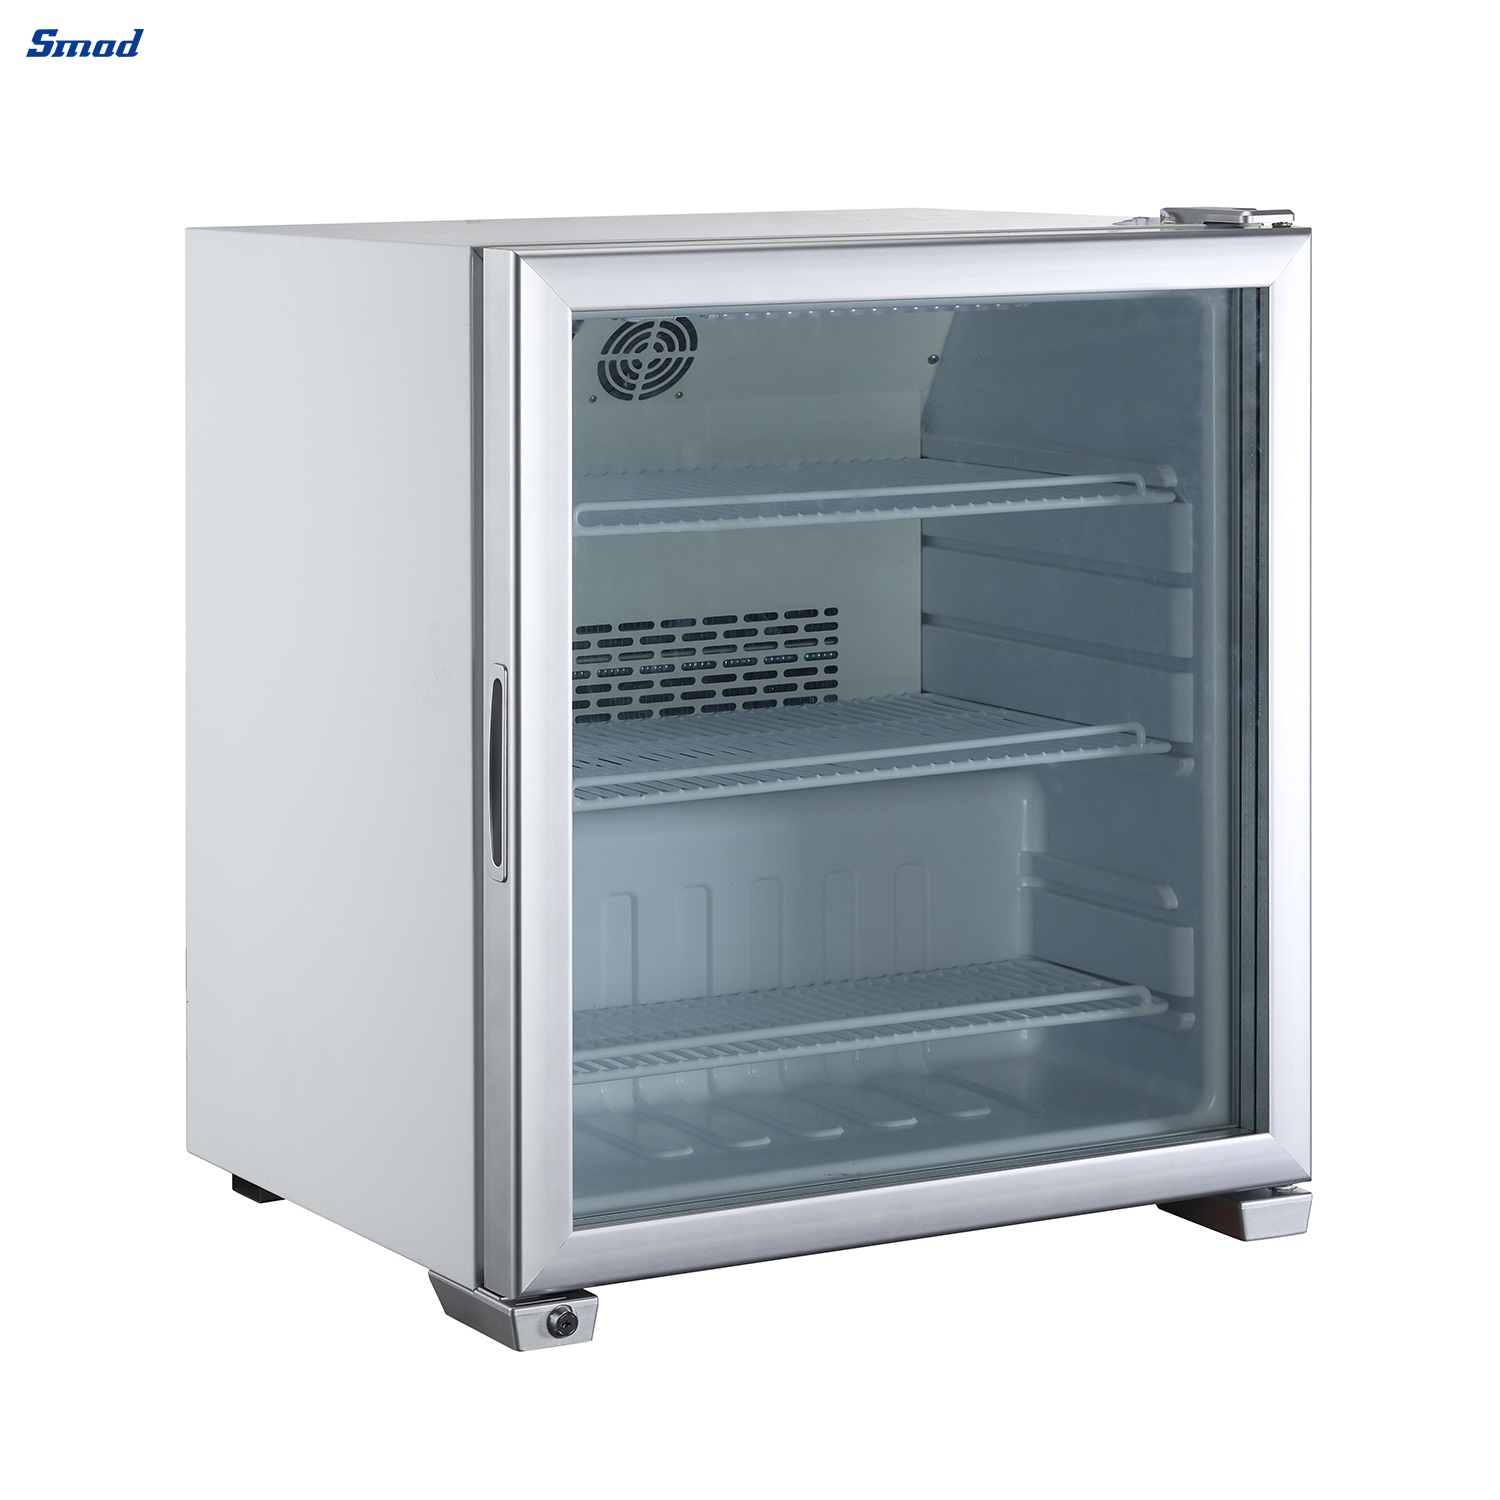 
Smad 49L Single Glass Door Countertop Ice Cream Display Freezer with Ventilated Cooling System